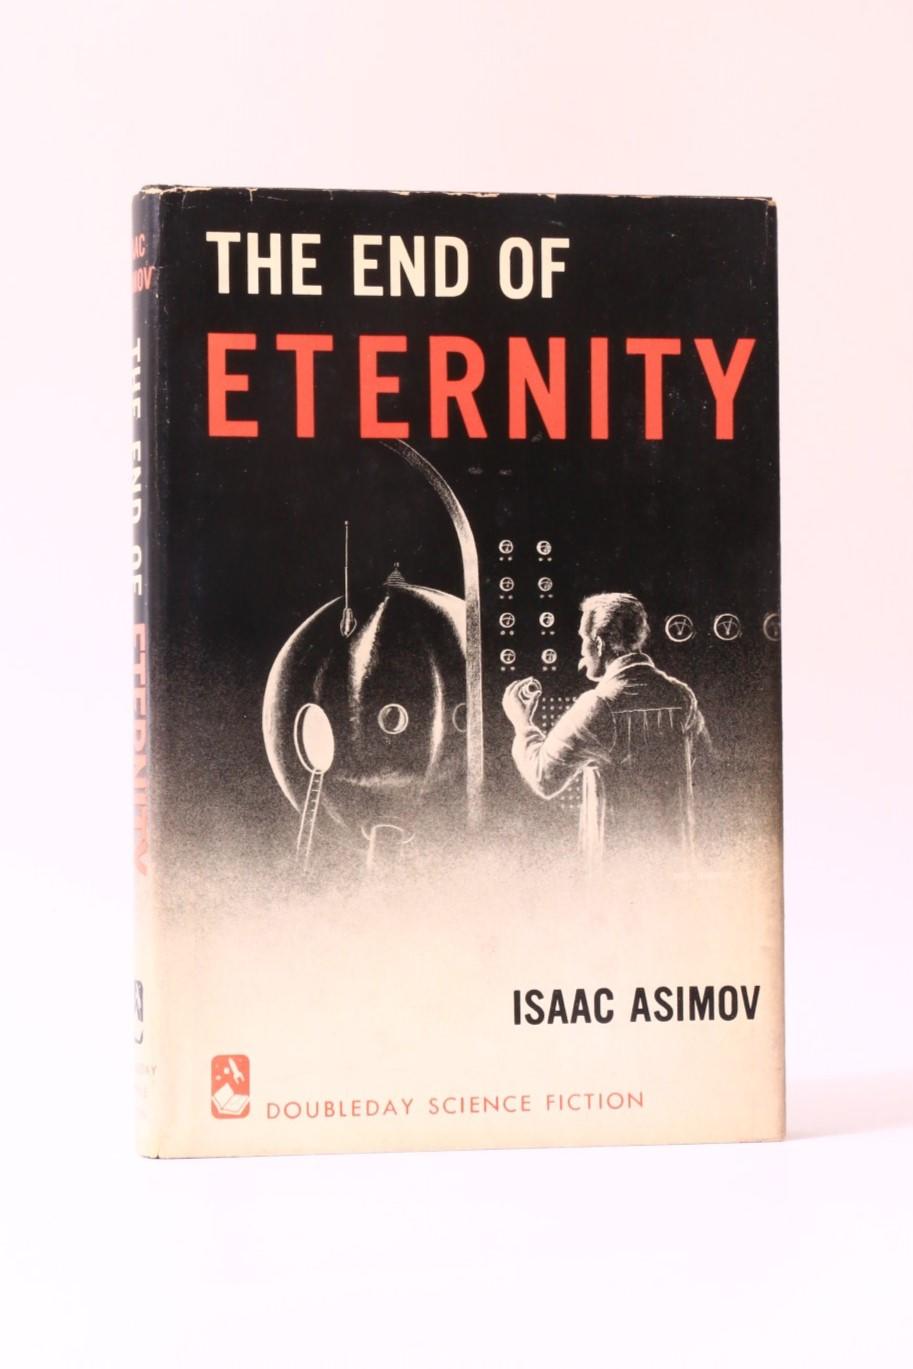 Isaac Asimov - The End of Eternity - Doubleday, 1955, First Edition.